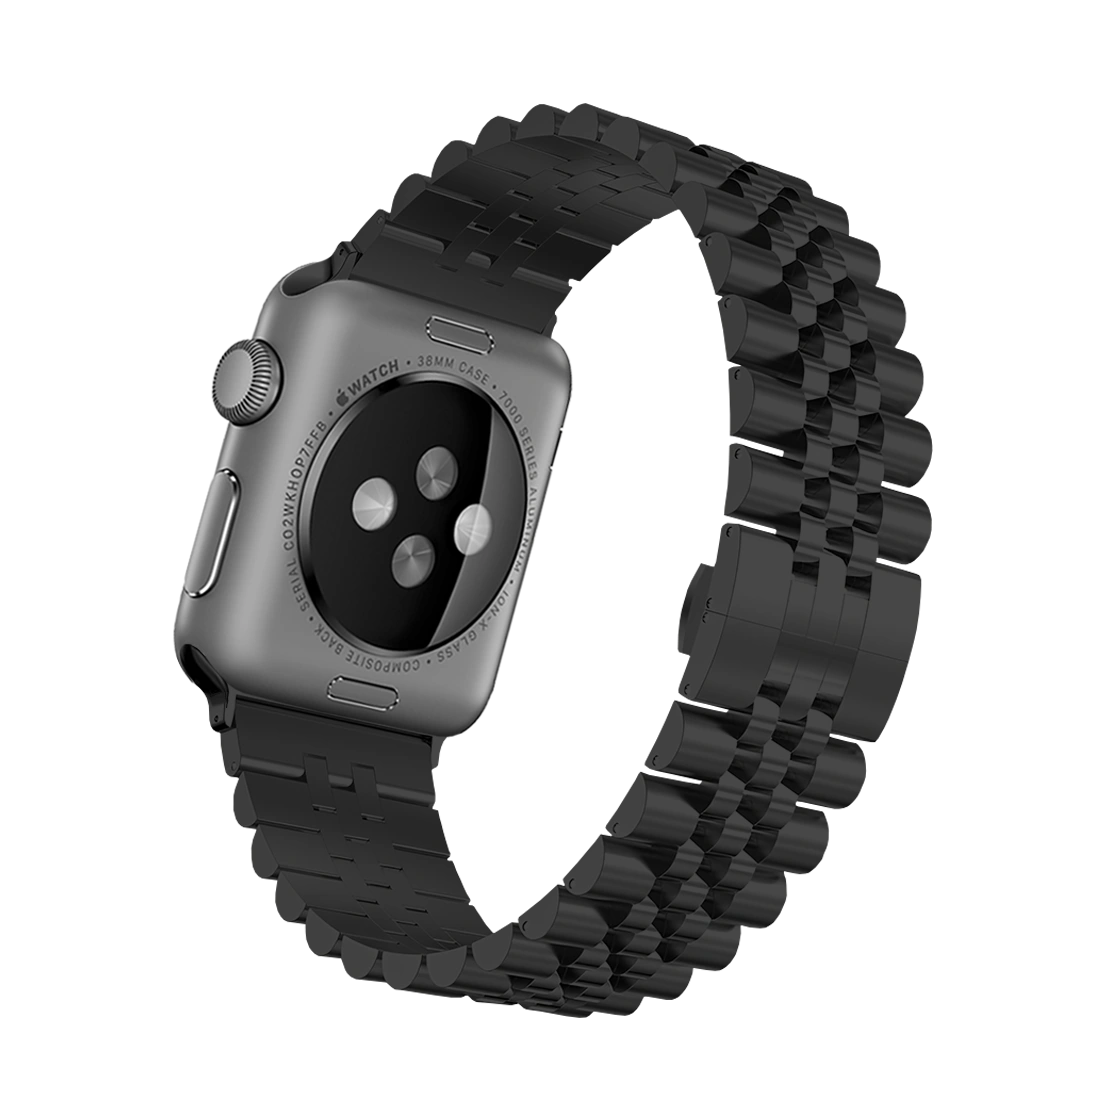 Apple Watch Ultra Titanium Case with Black/Gray Trail Loop